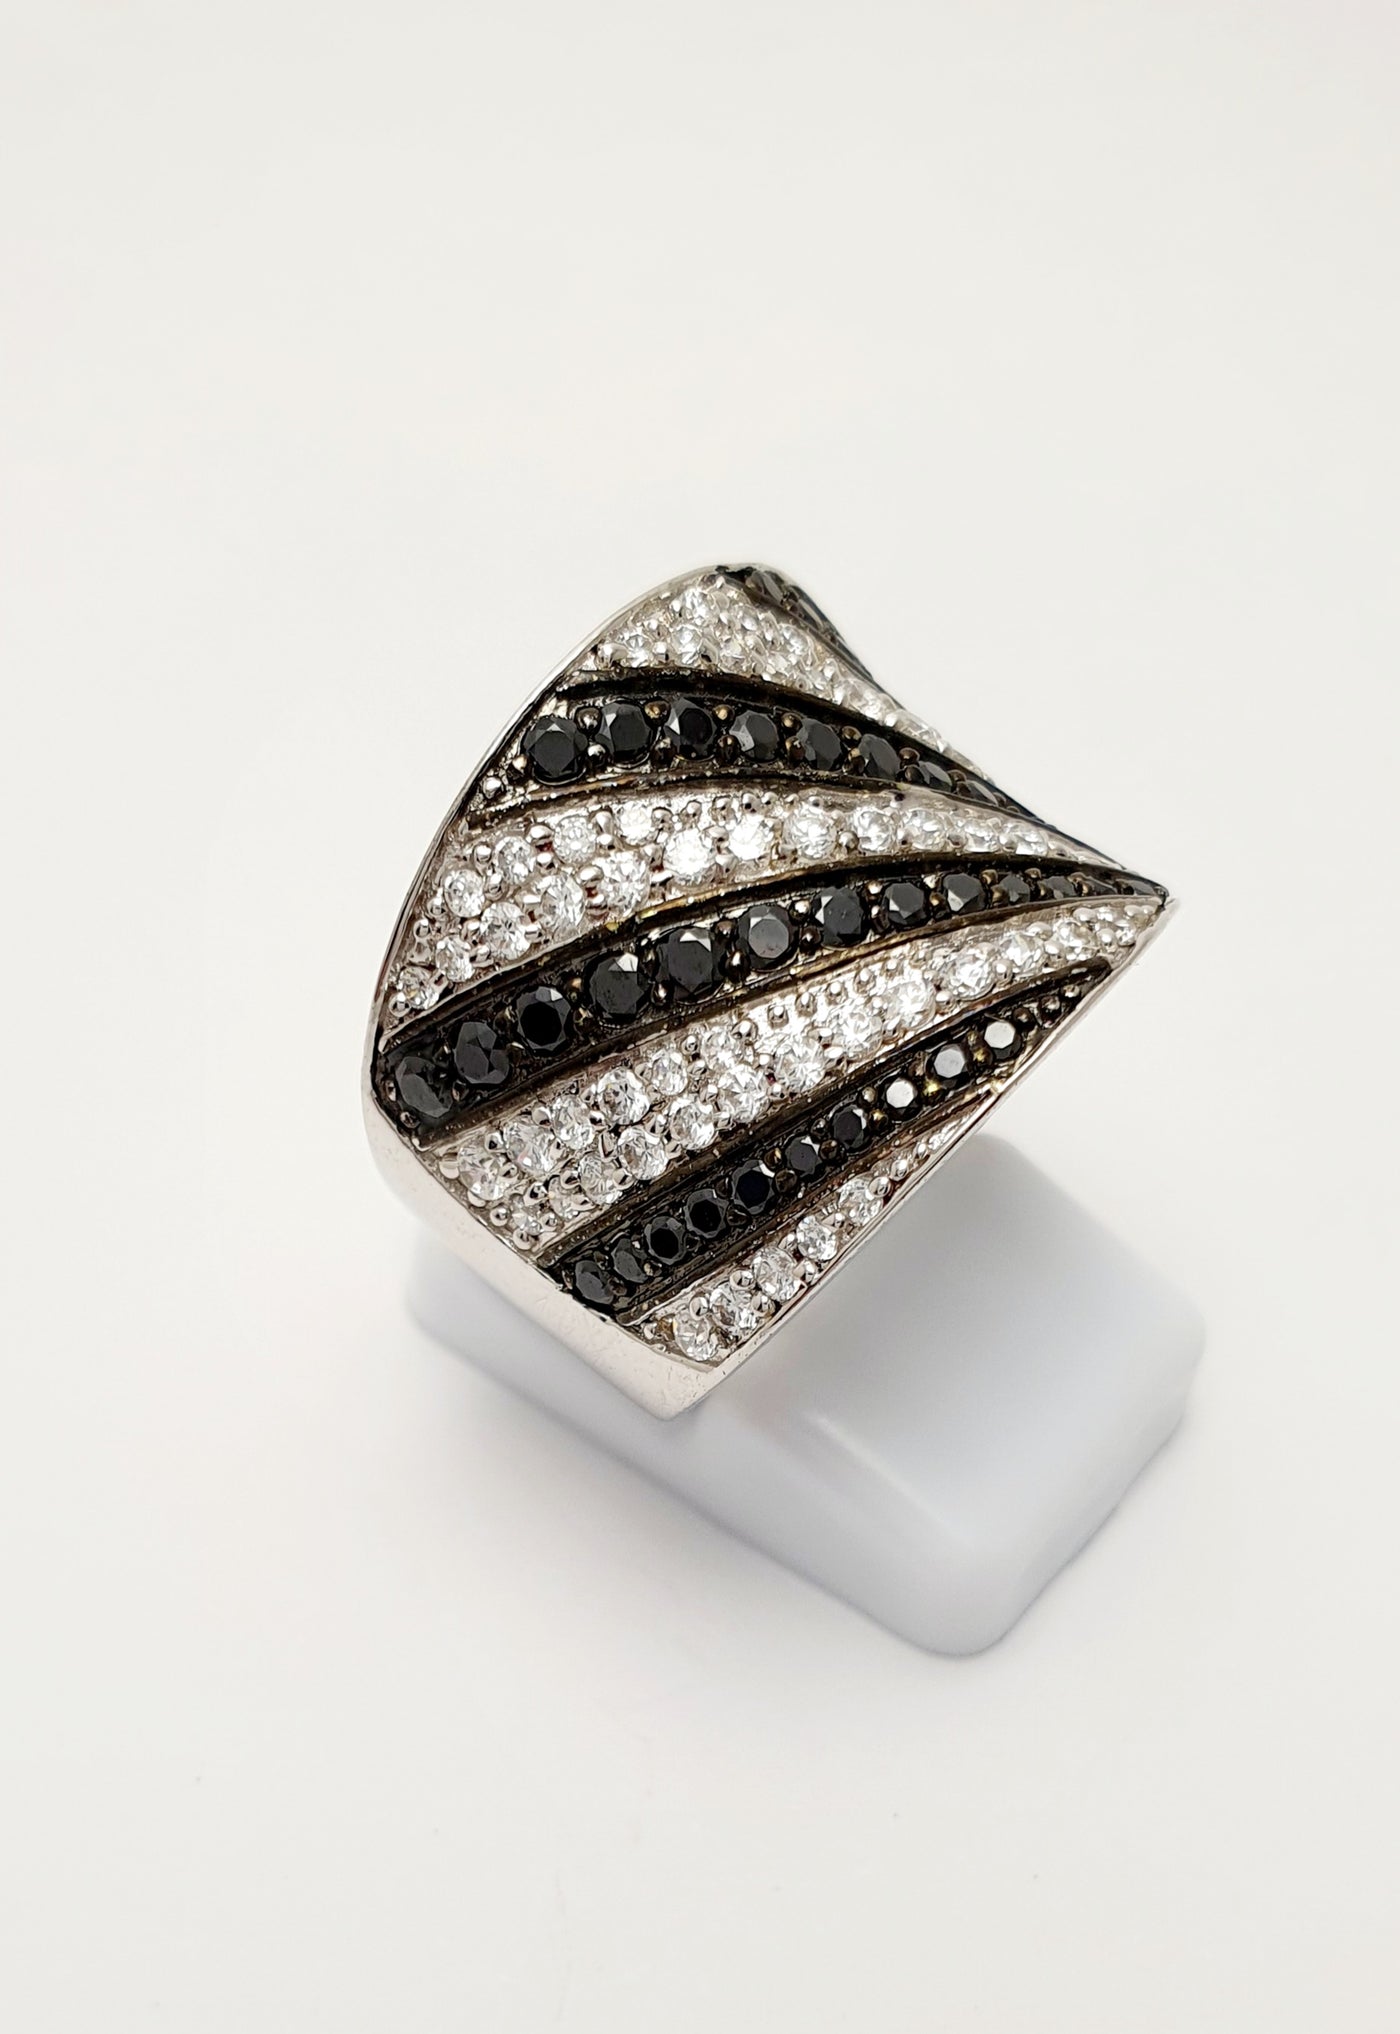 Sterling Silver Diagonal Design Wide Pave Ring with White and Black Cubic Zirconias